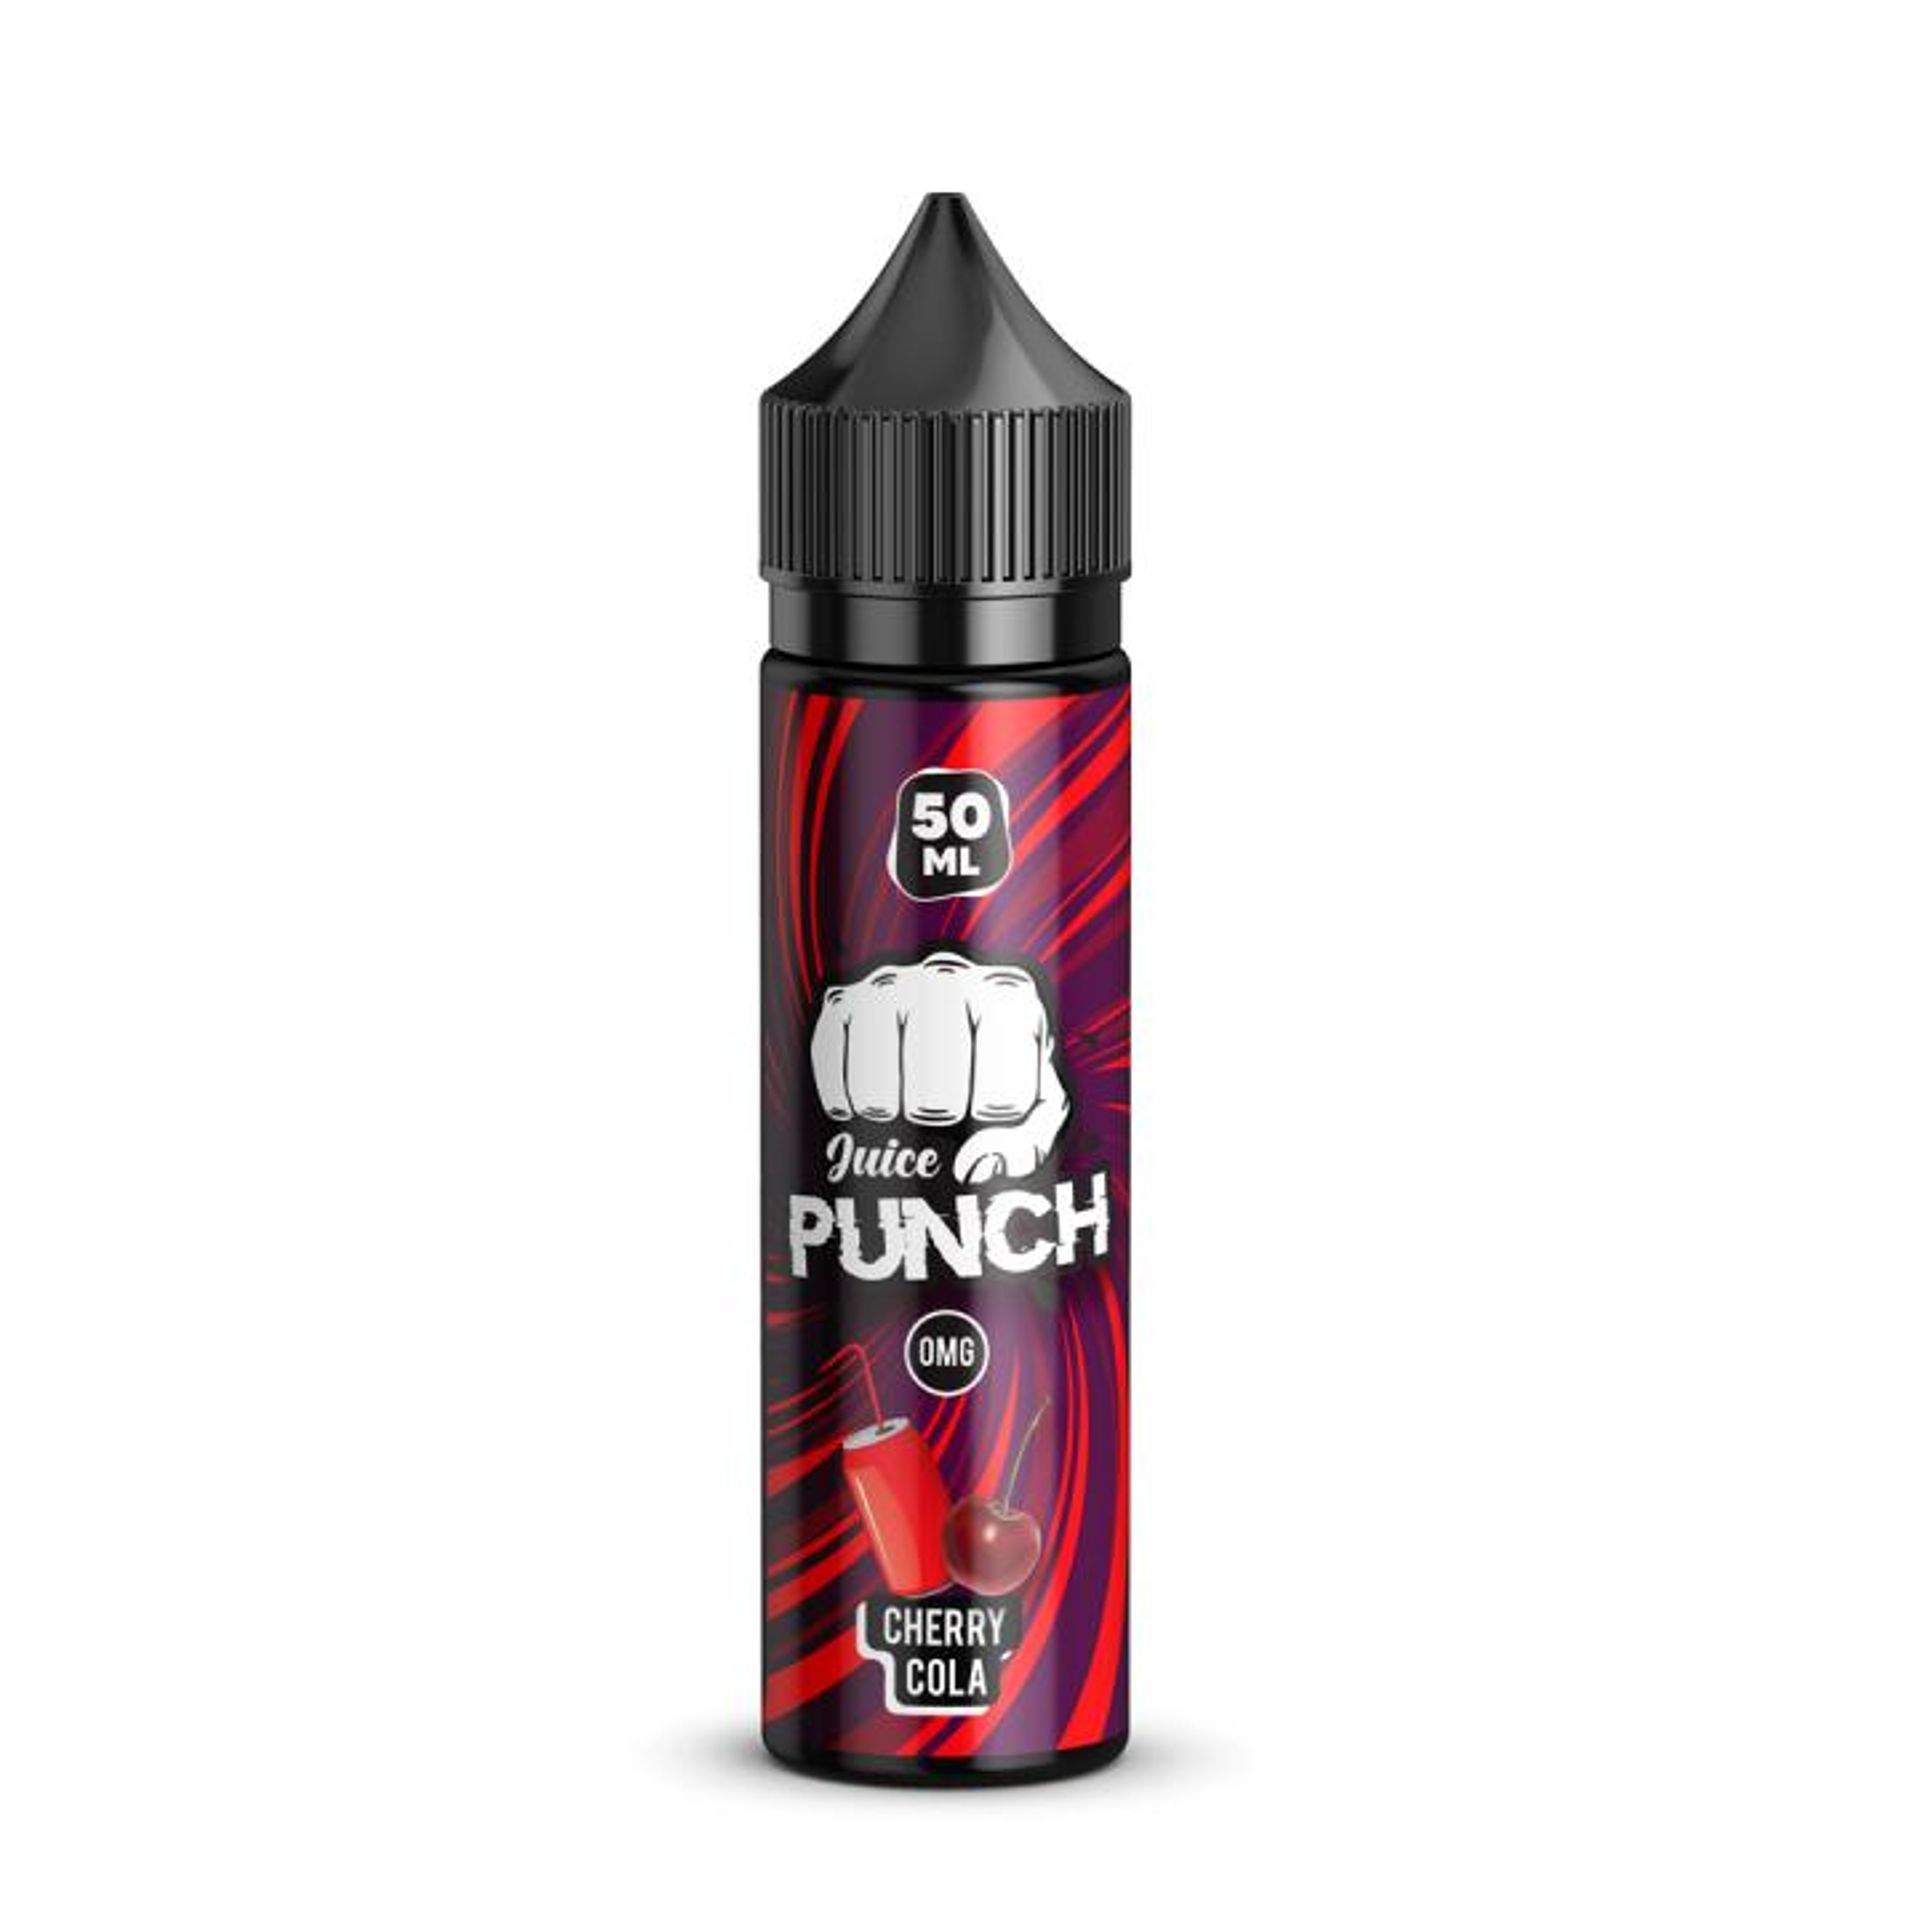 Image of Cherry Cola by Juice Punch